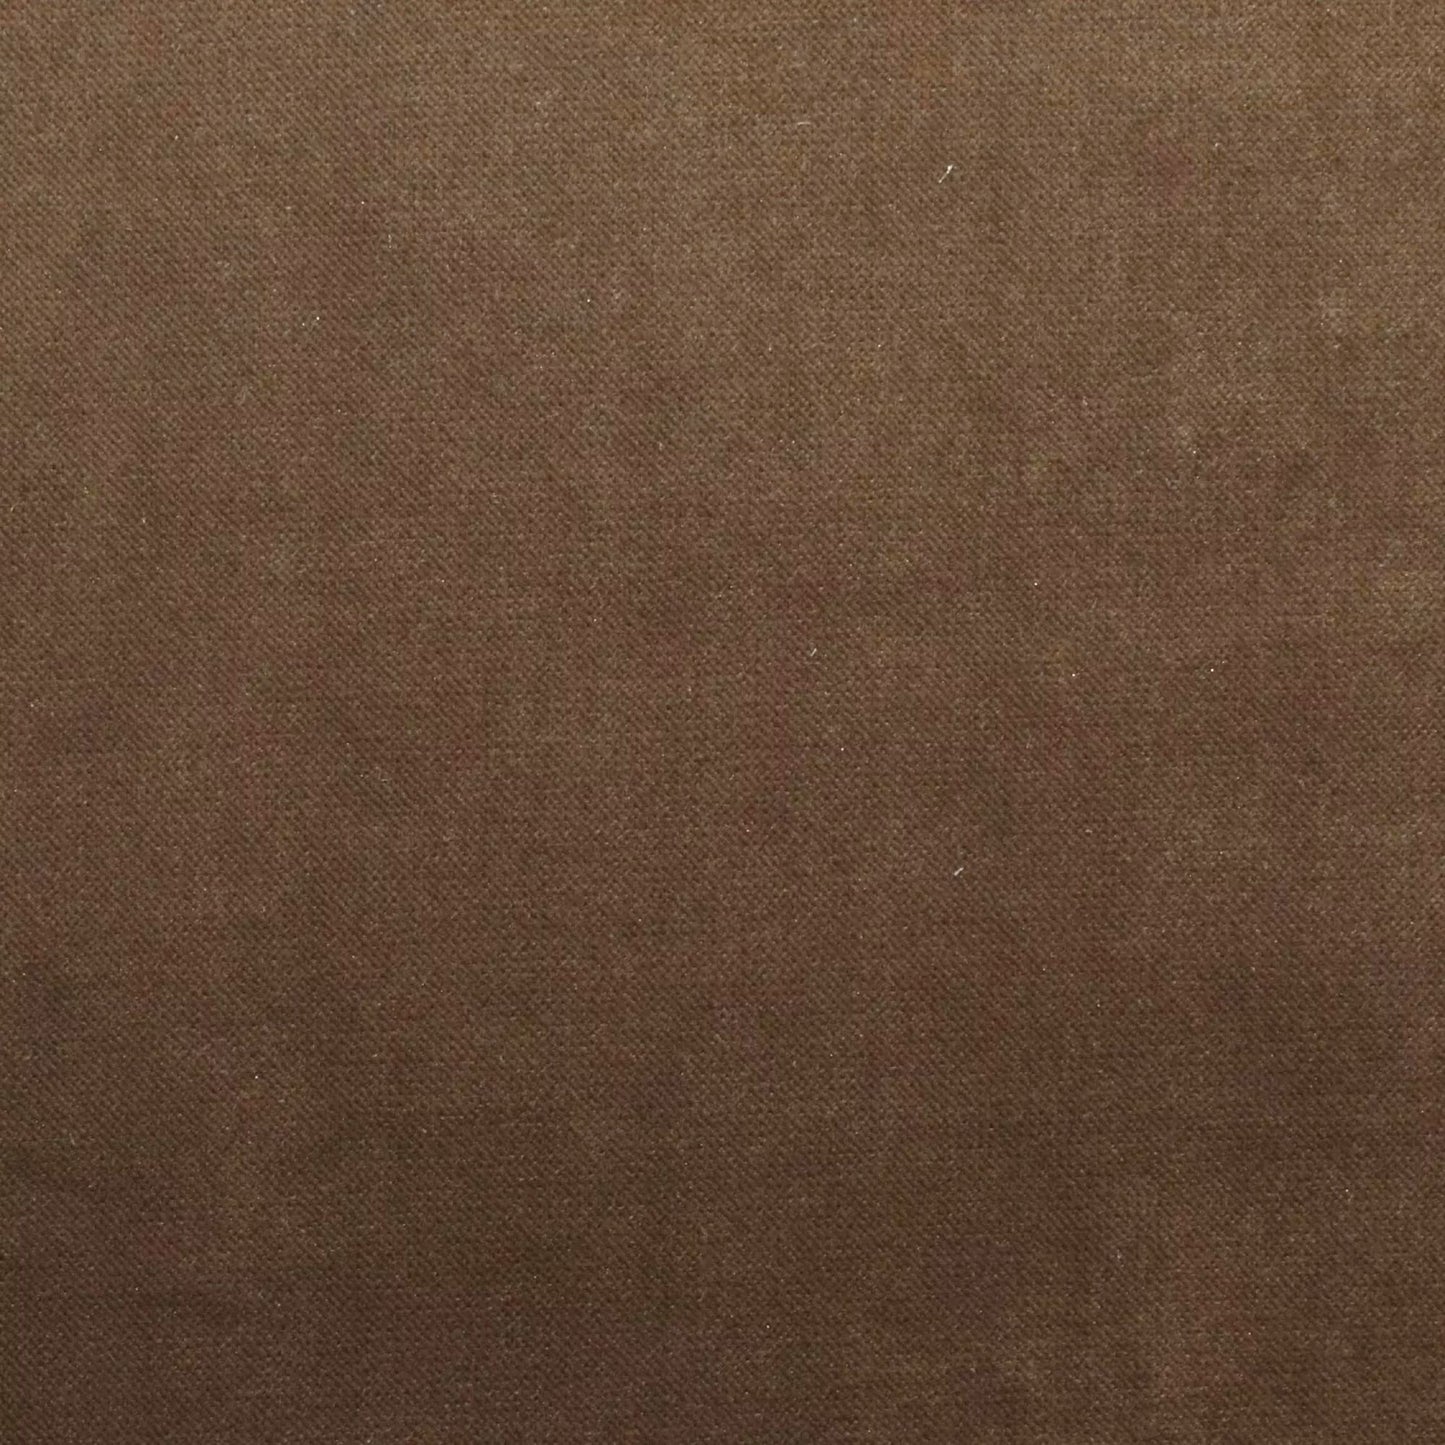 MYSTERE TAUPE FABRIC SAMPLE | MID RANGE COLLECTION